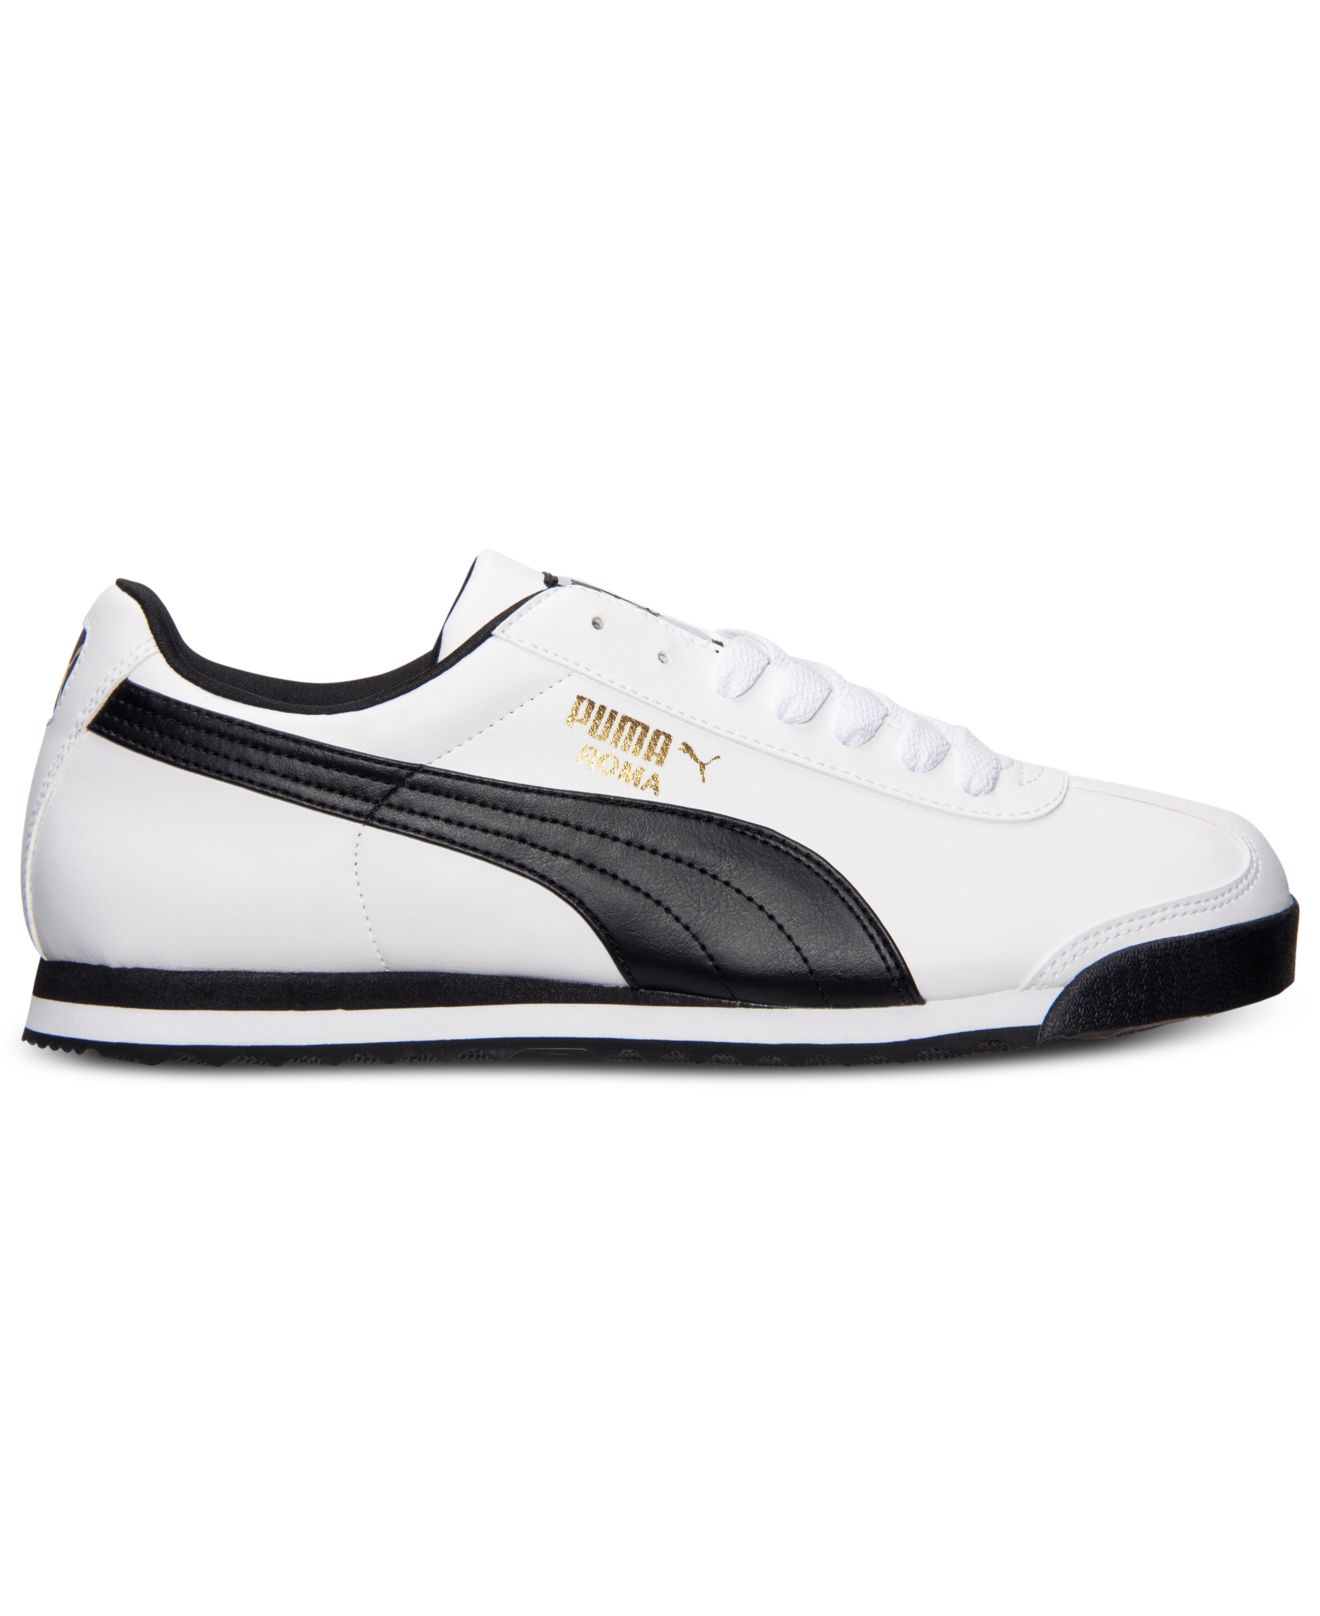 Lyst - Puma Men's Roma Basic Casual Sneakers From Finish Line in White ...